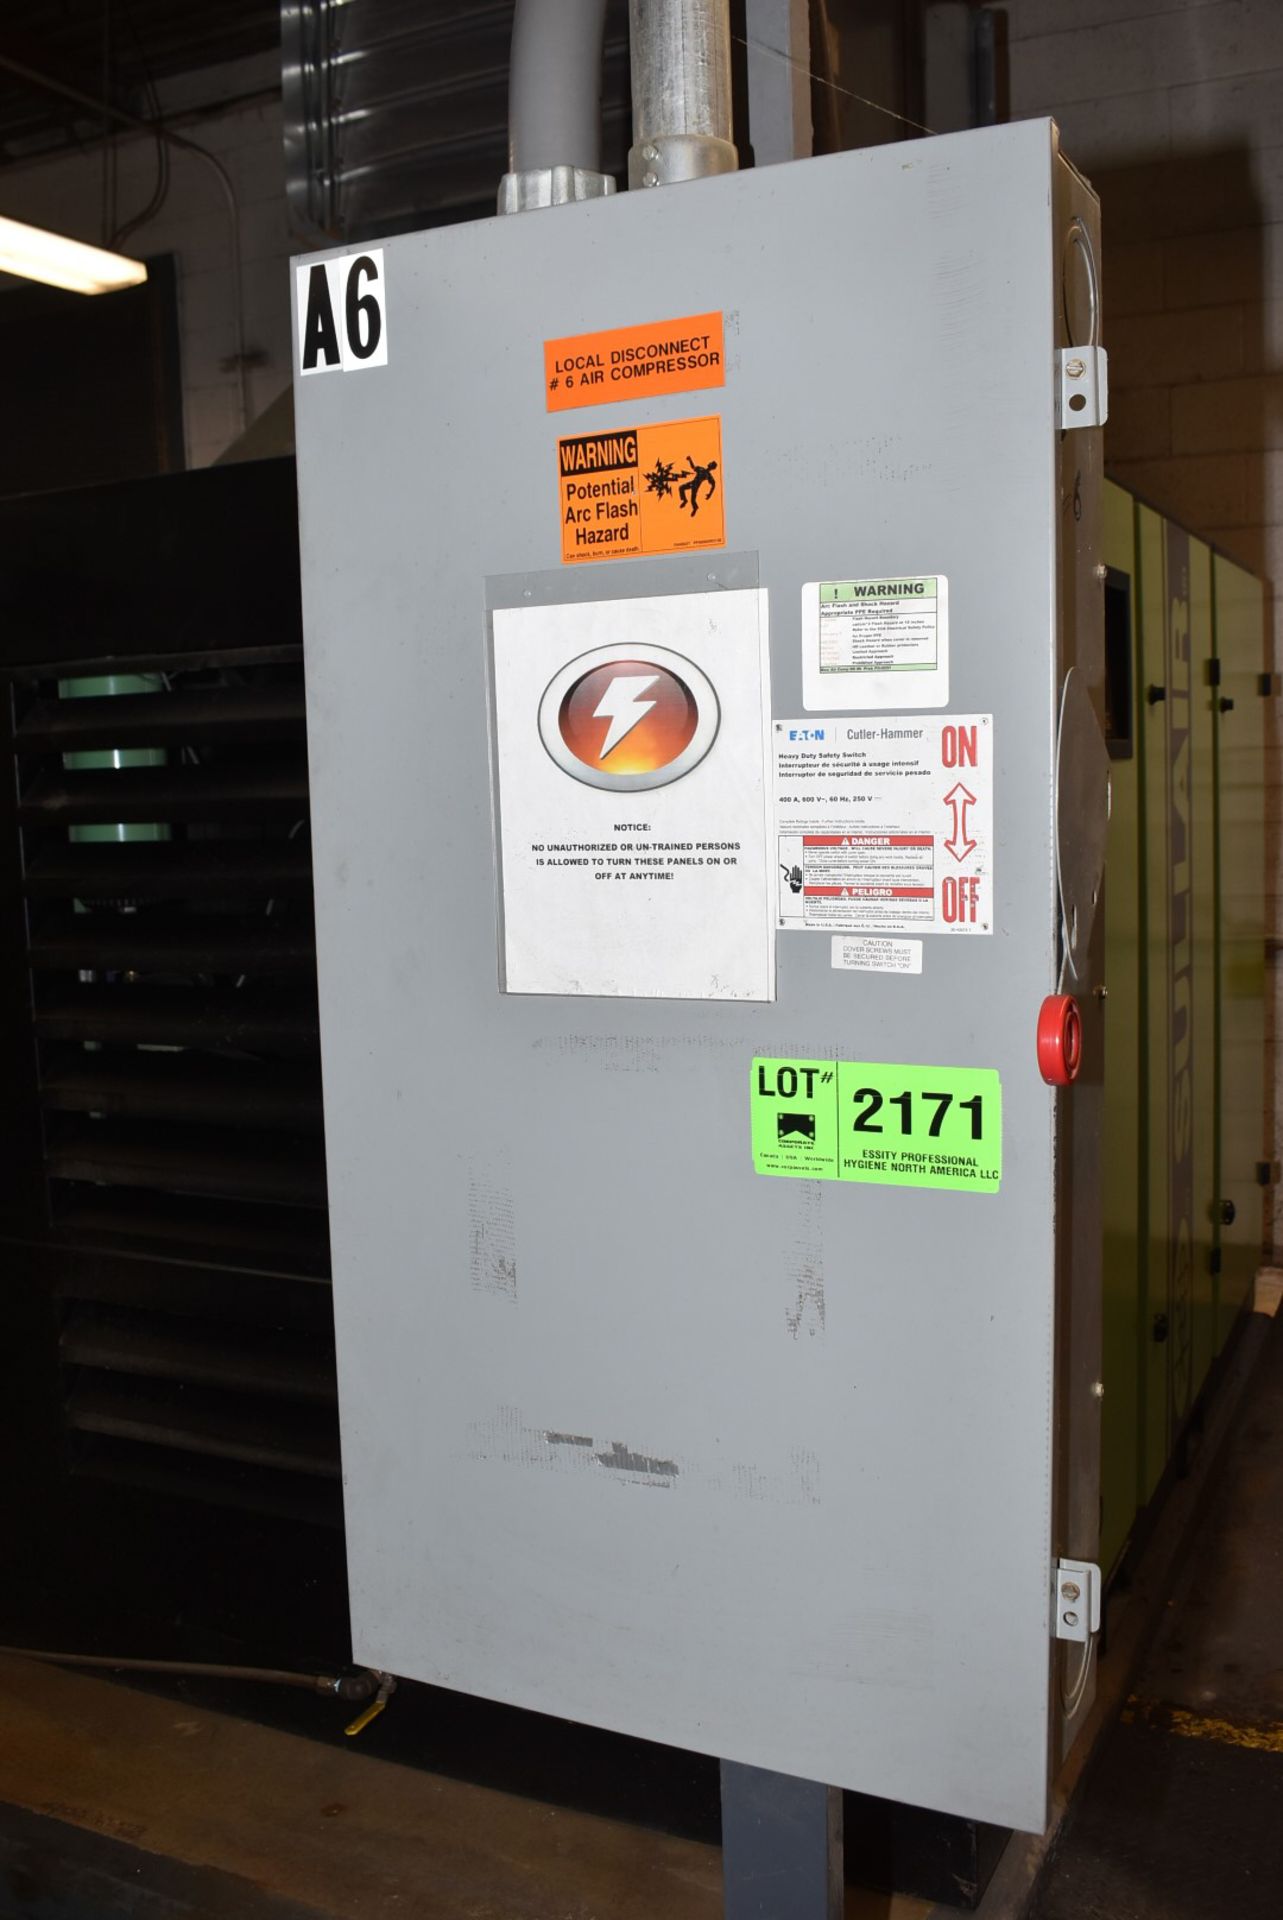 EATON HEAVY DUTY SAFETY SWITCH 400A, 600V, 60 HZ (CI) (DELAYED DELIVERY) [RIGGING FEES FOR LOT #2171